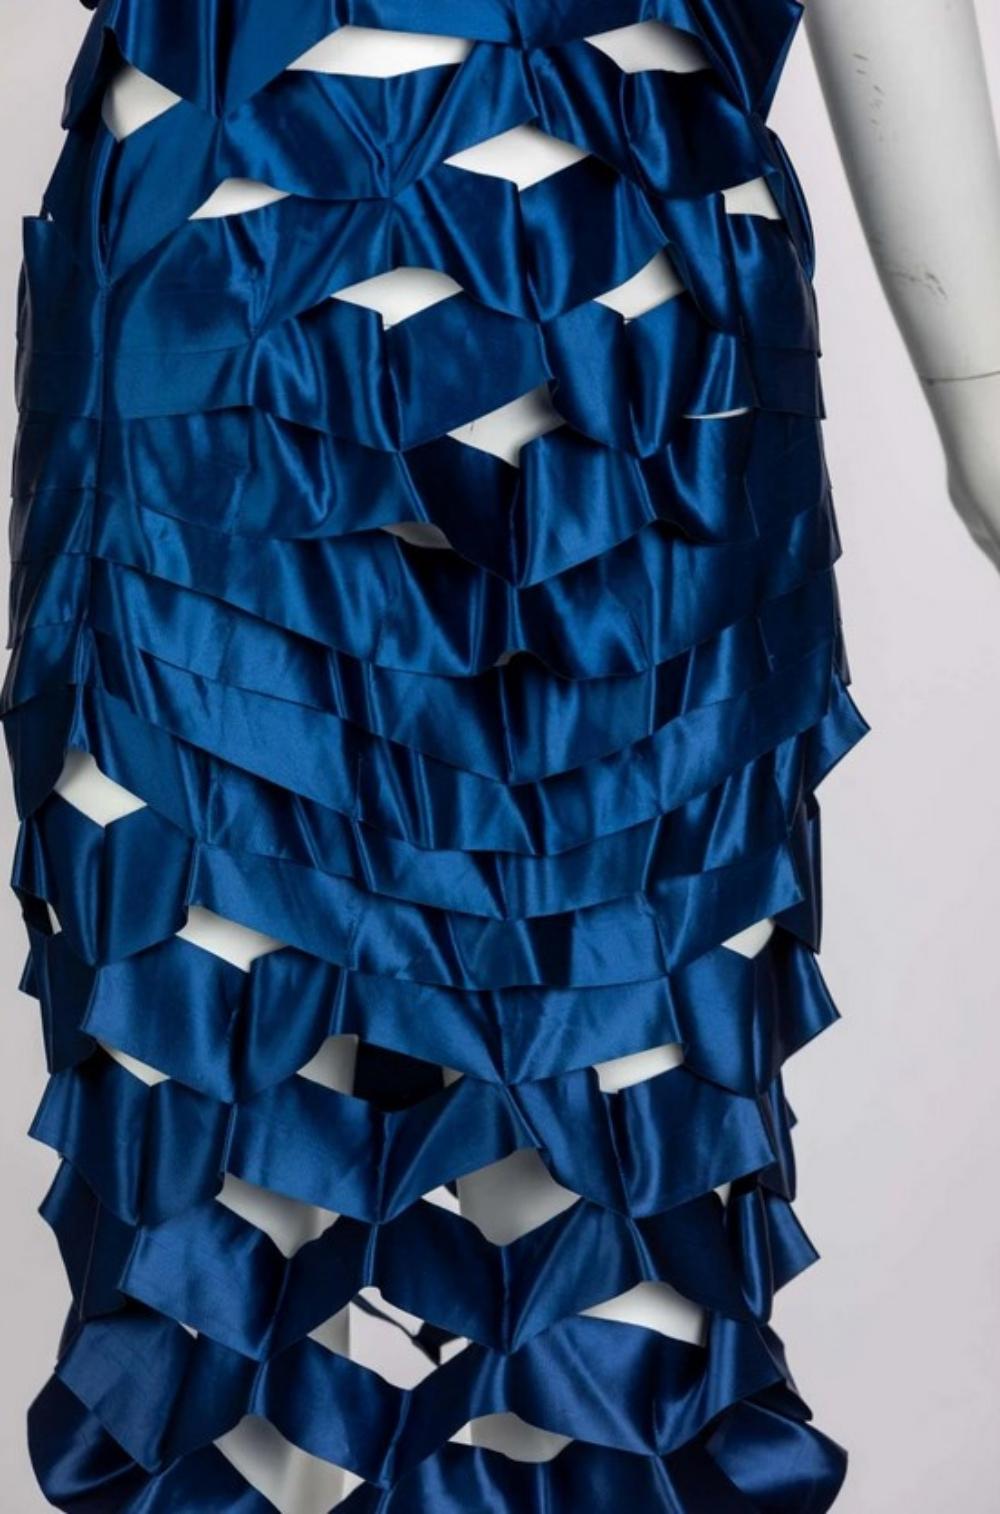 Issey Miyake Sapphire Japanese Blue Satin Ribbon Cage Dress, 1990s For Sale 2